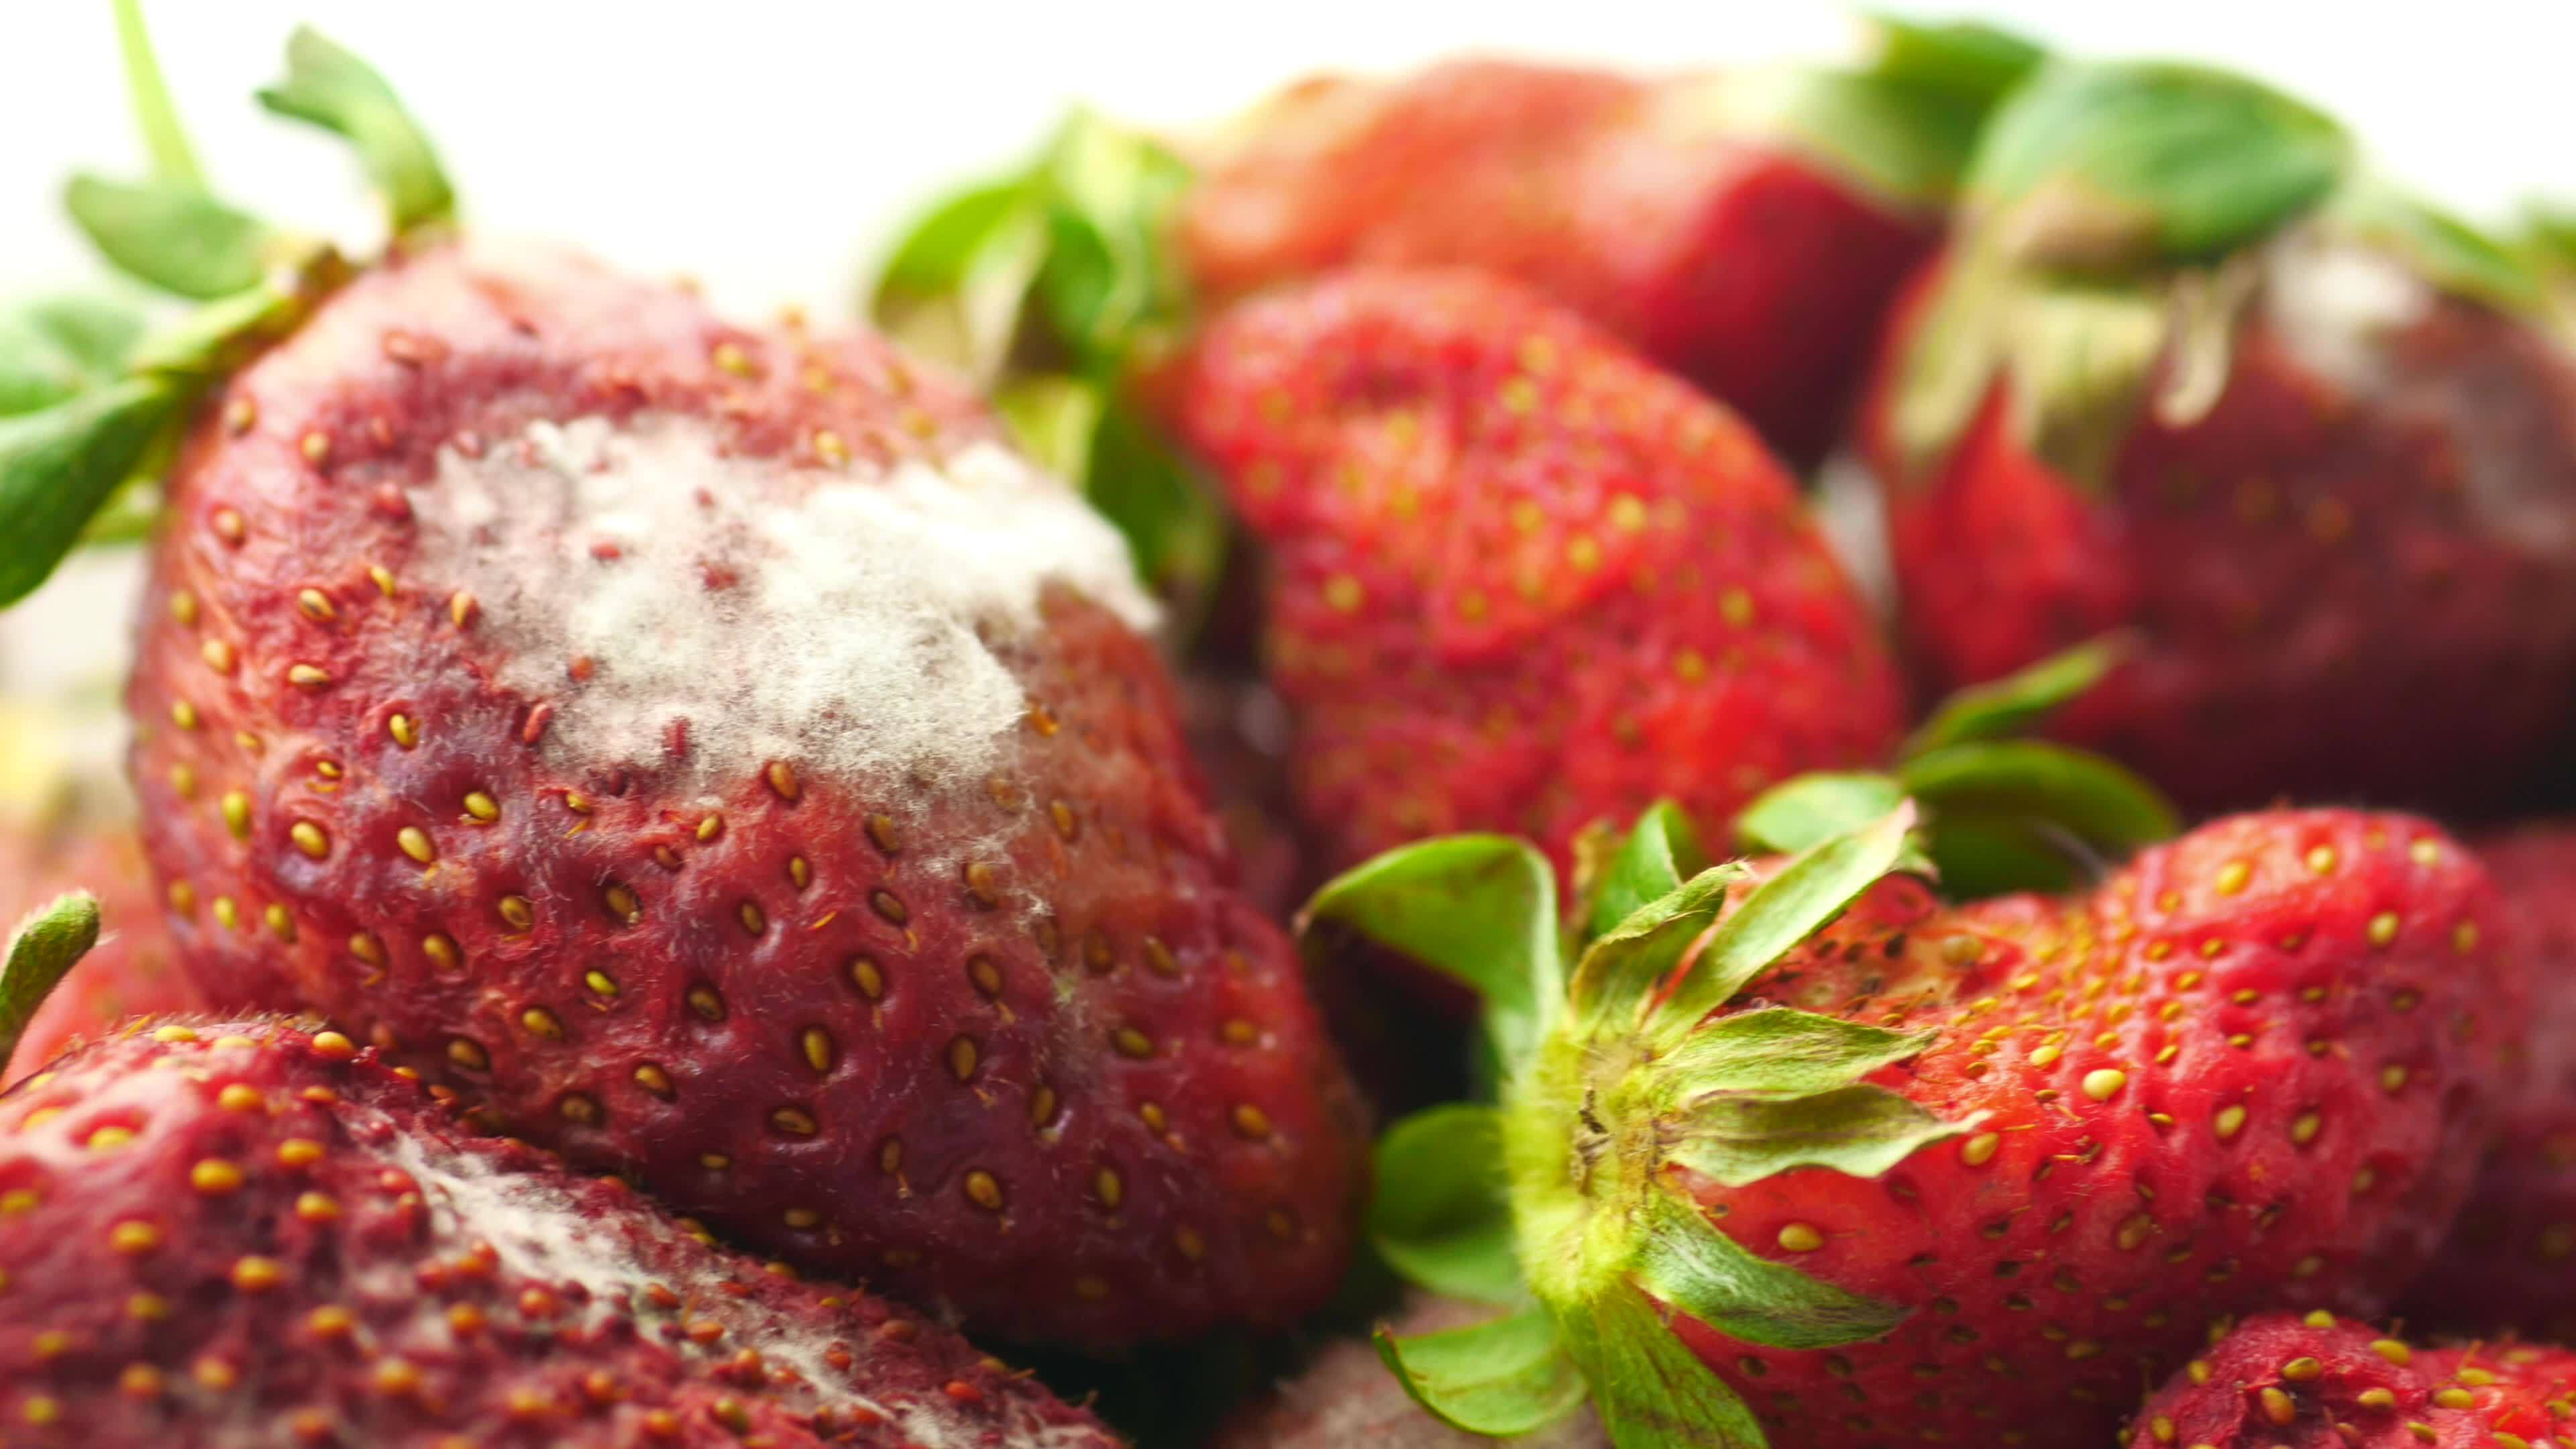 Mold on Strawberries